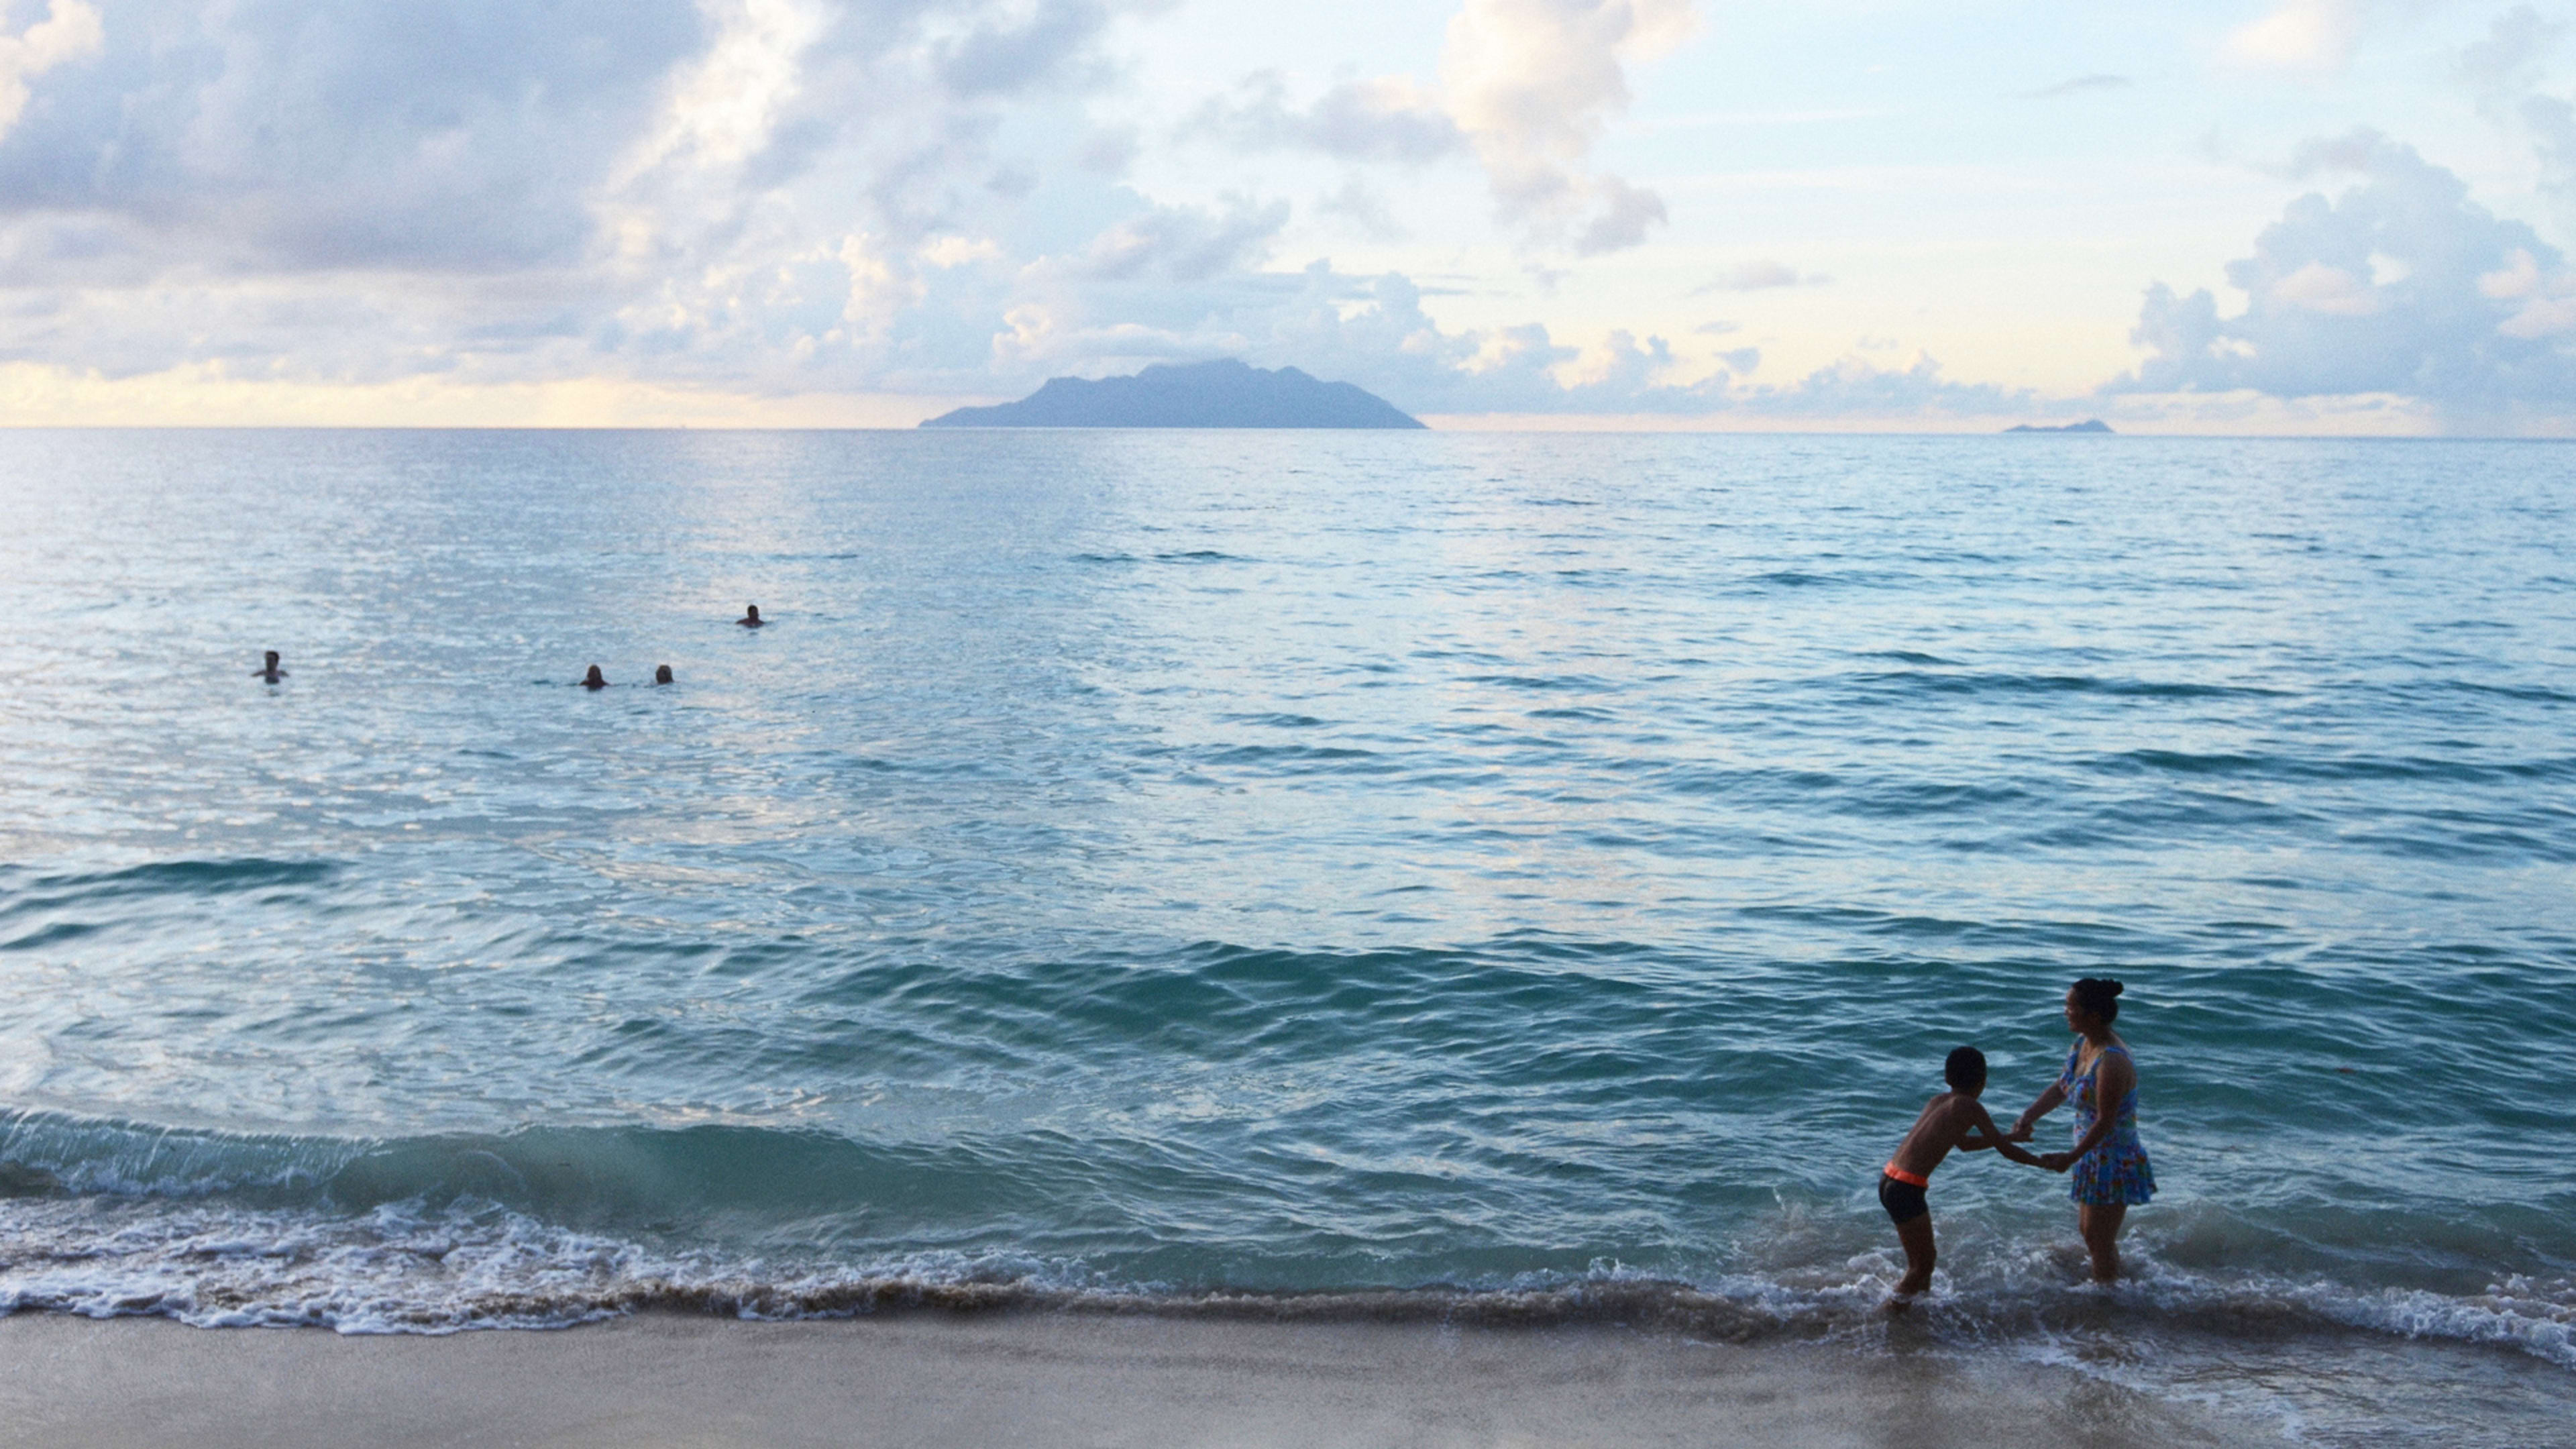 This Island Nation Swapped Some Of Its Debt To Protect Its Oceans